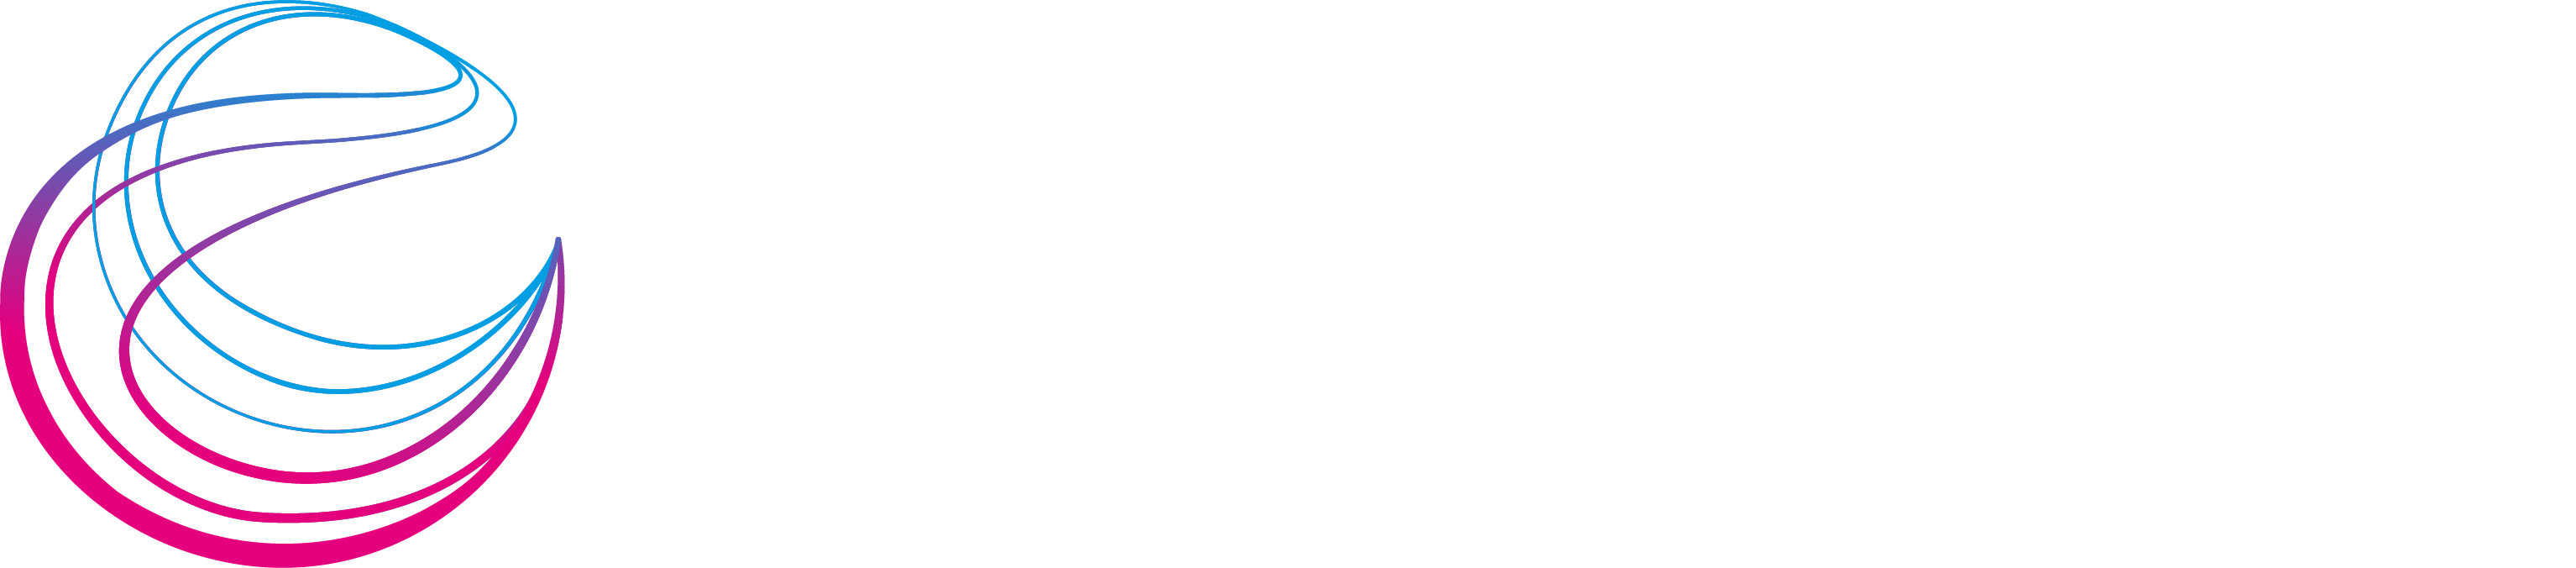 Chartered Institute of Information Security logo